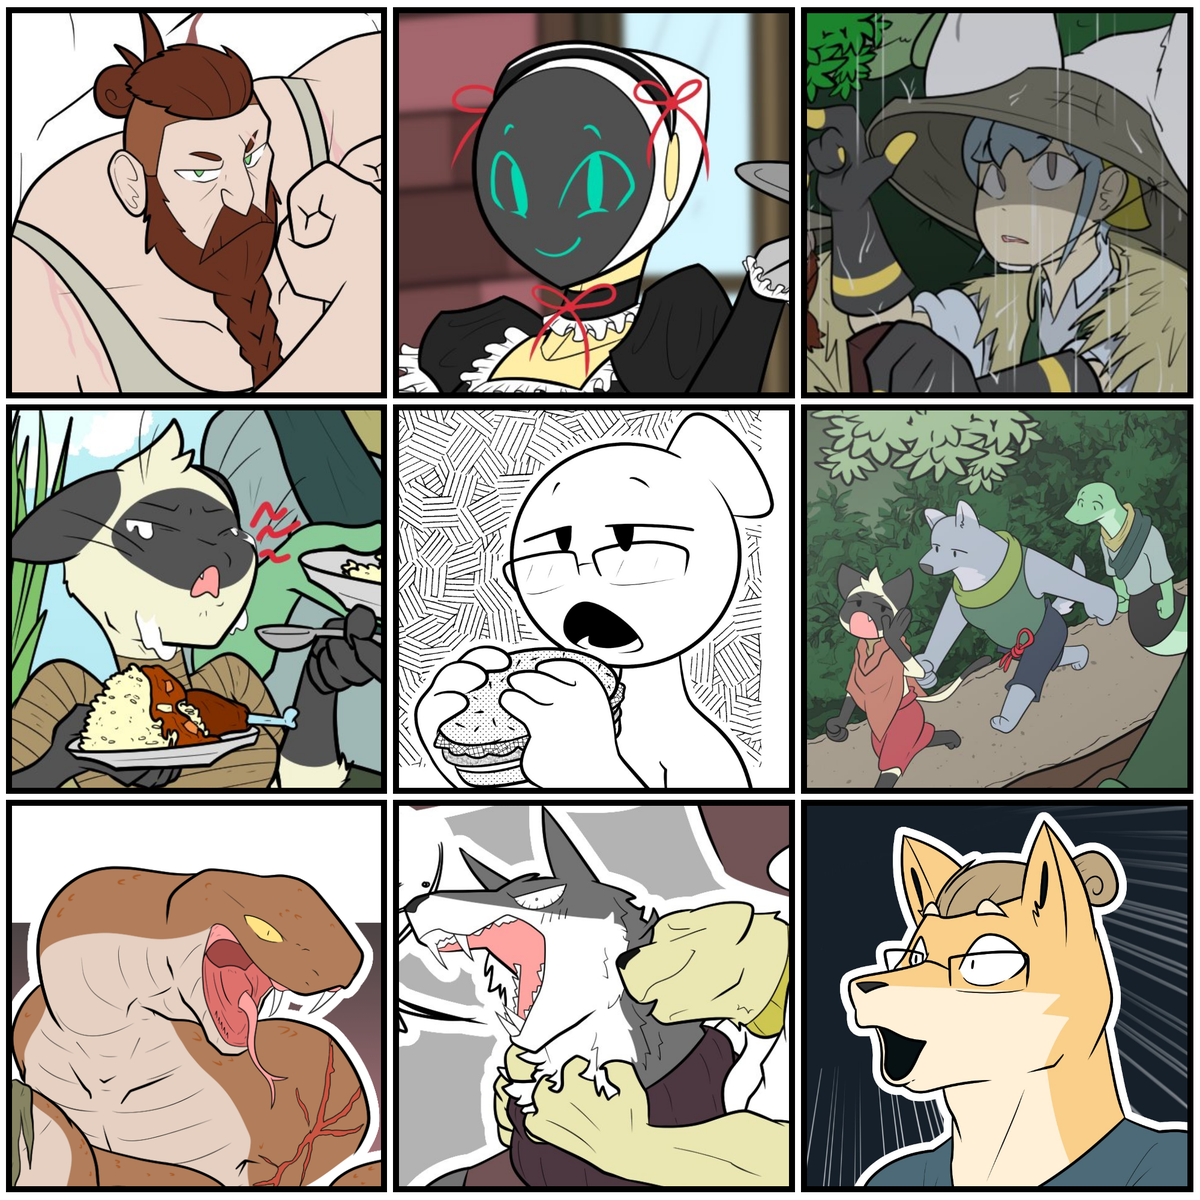 Ay yo I'm in on this too

#faceyourart 